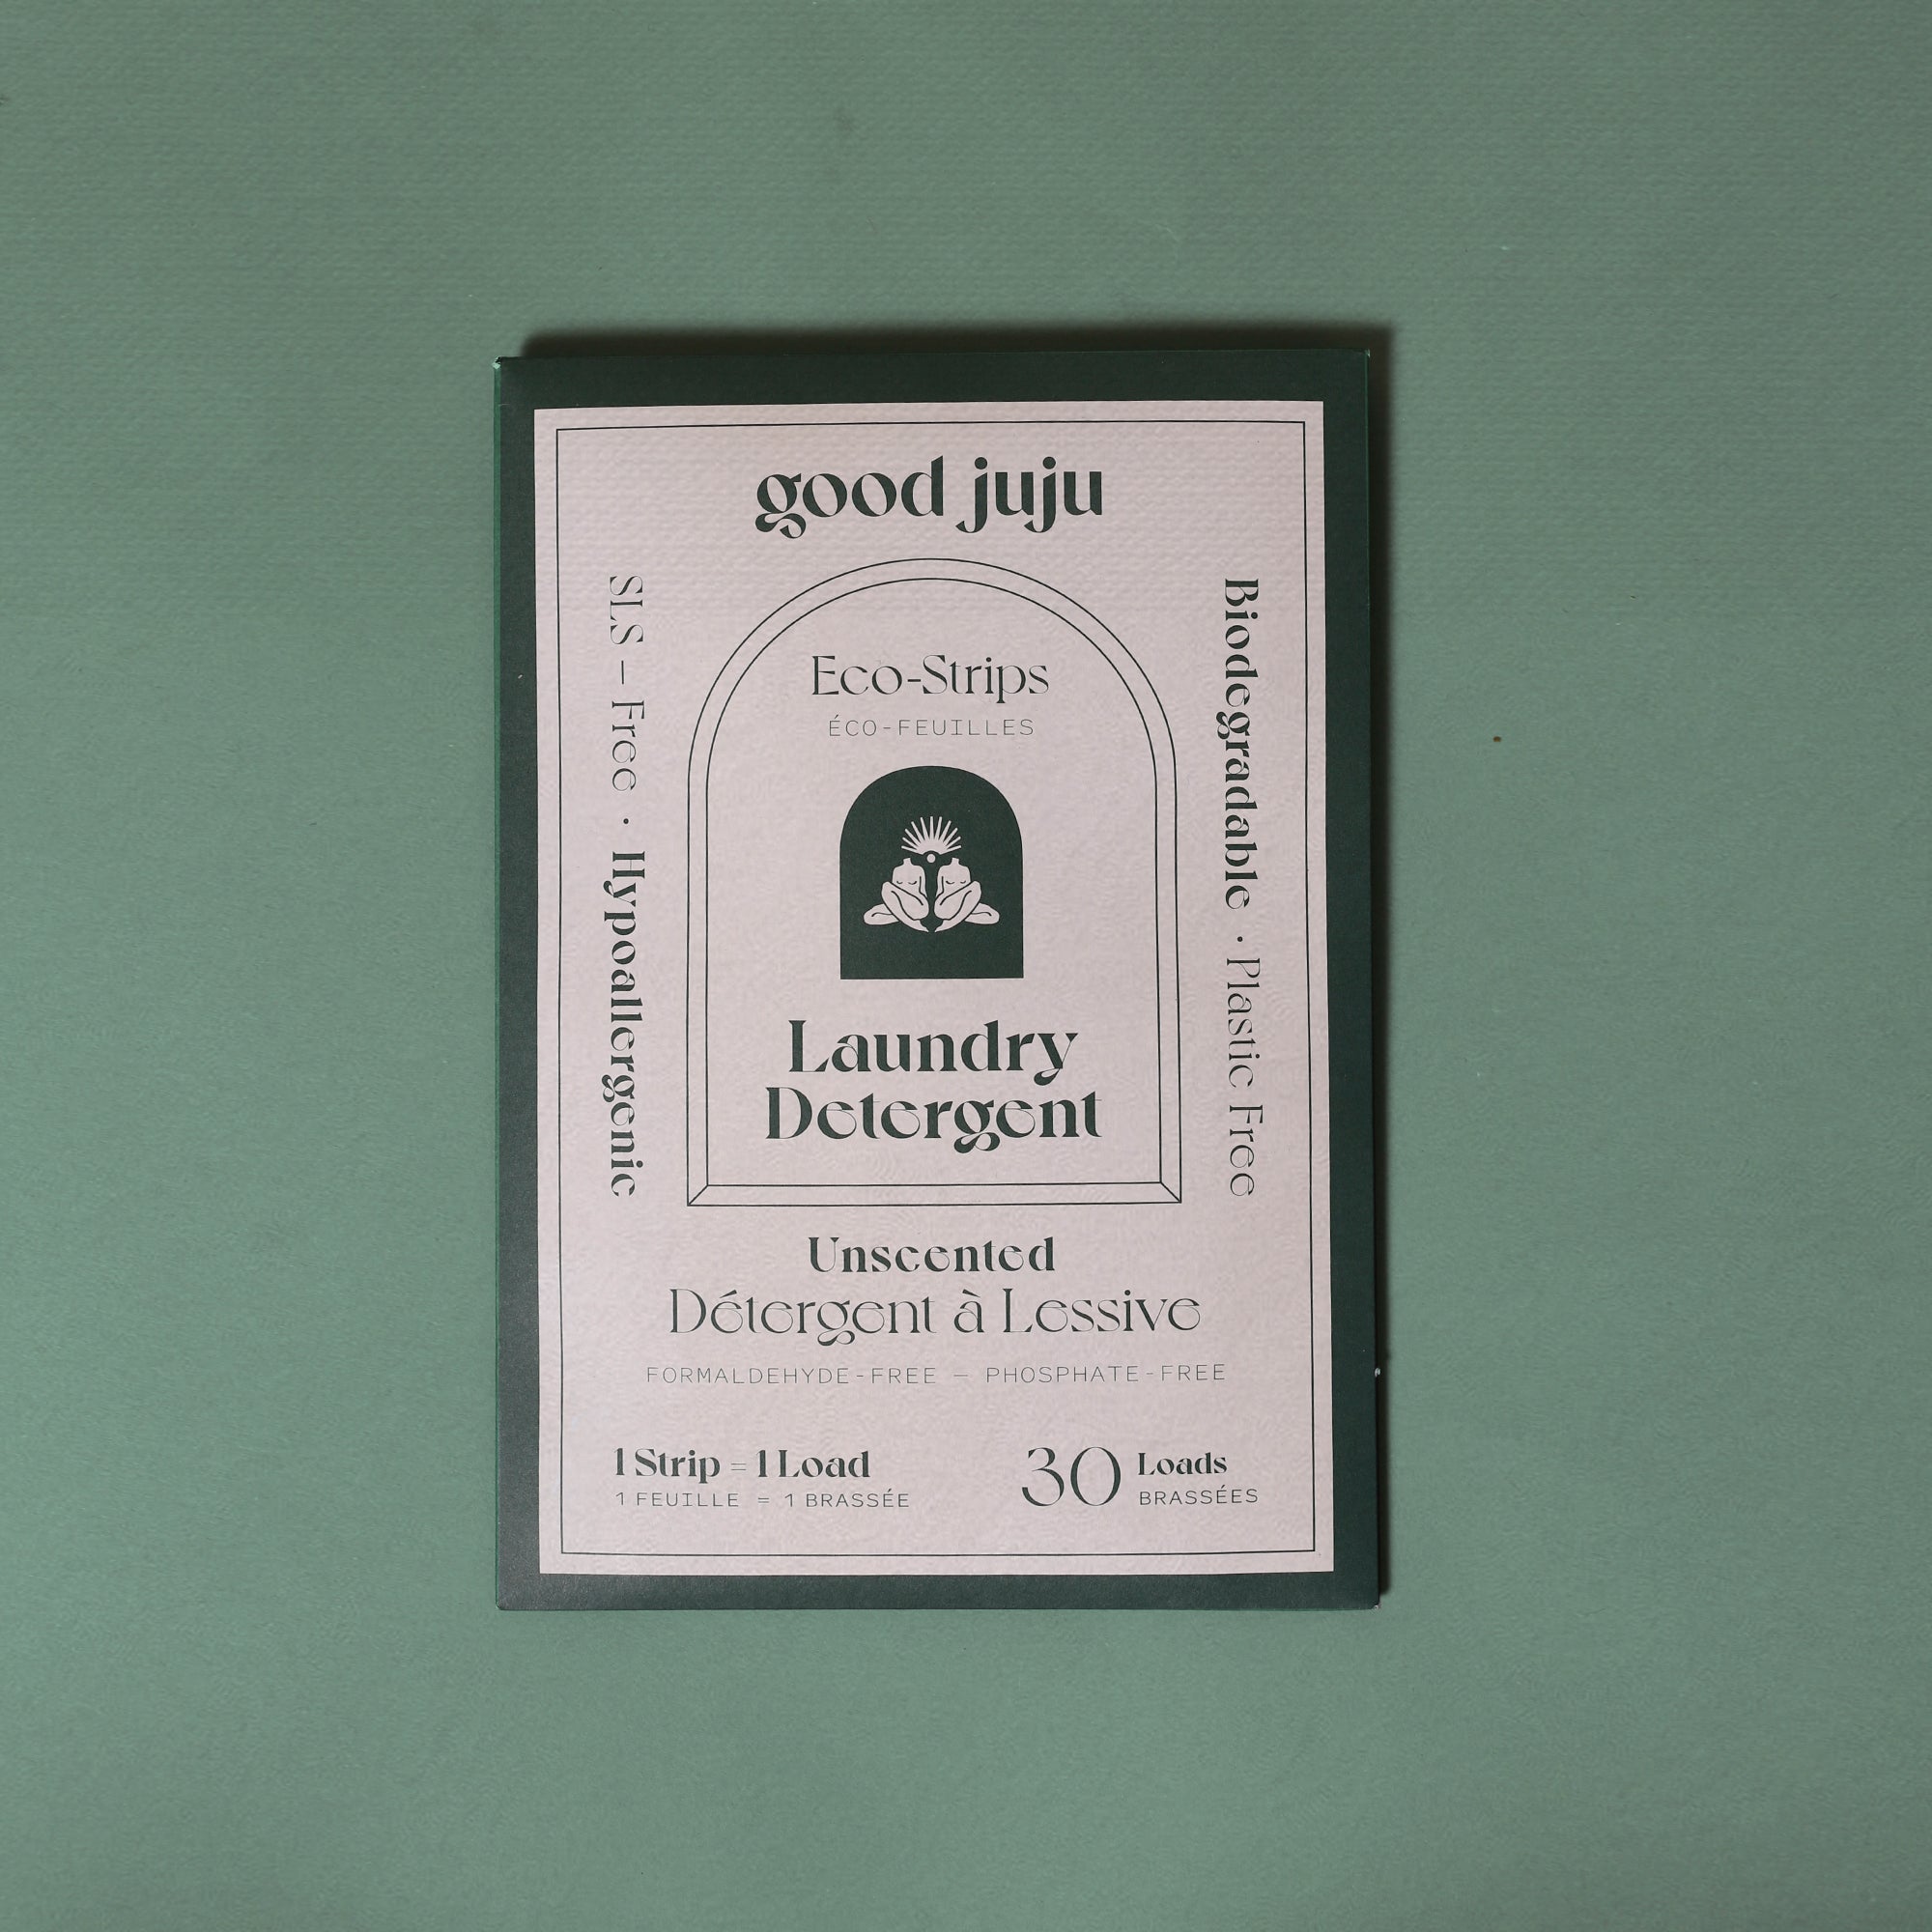 Good Juju - Laundry Detergent Eco-Strips - Unscented